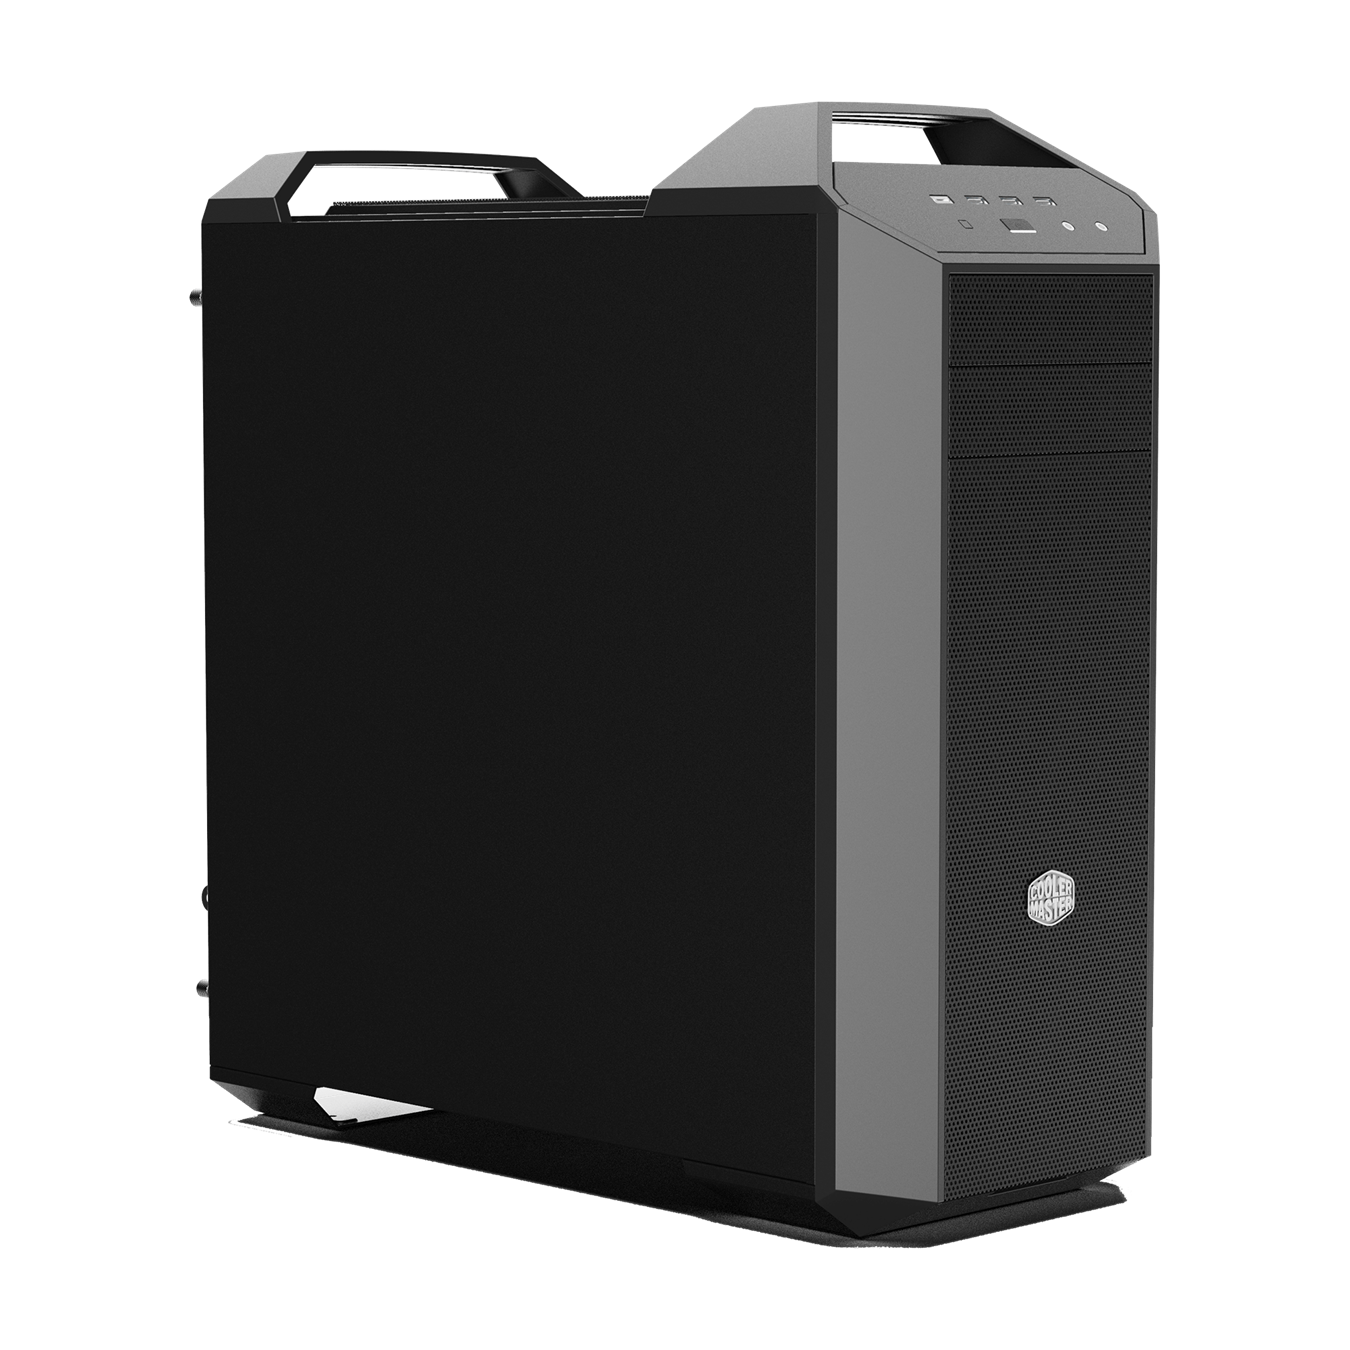 MasterCase MC500 supports mammoth storage of up to ten HDDs and two SDDs, adjustable in position to allow for multiple system configurations as well as accommodate all of your storage and creative needs.